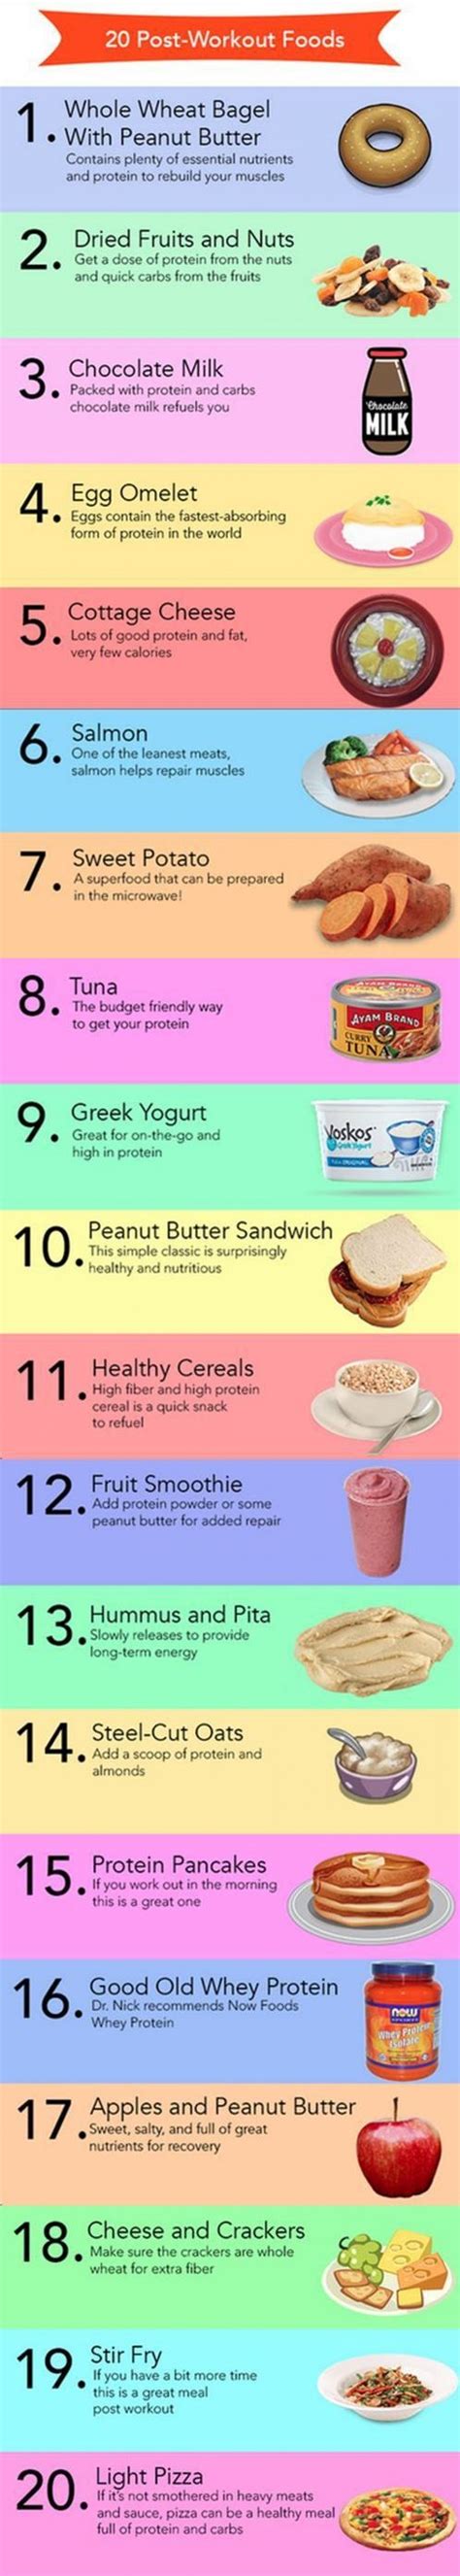 20 Post Workout Foods Pictures Photos And Images For